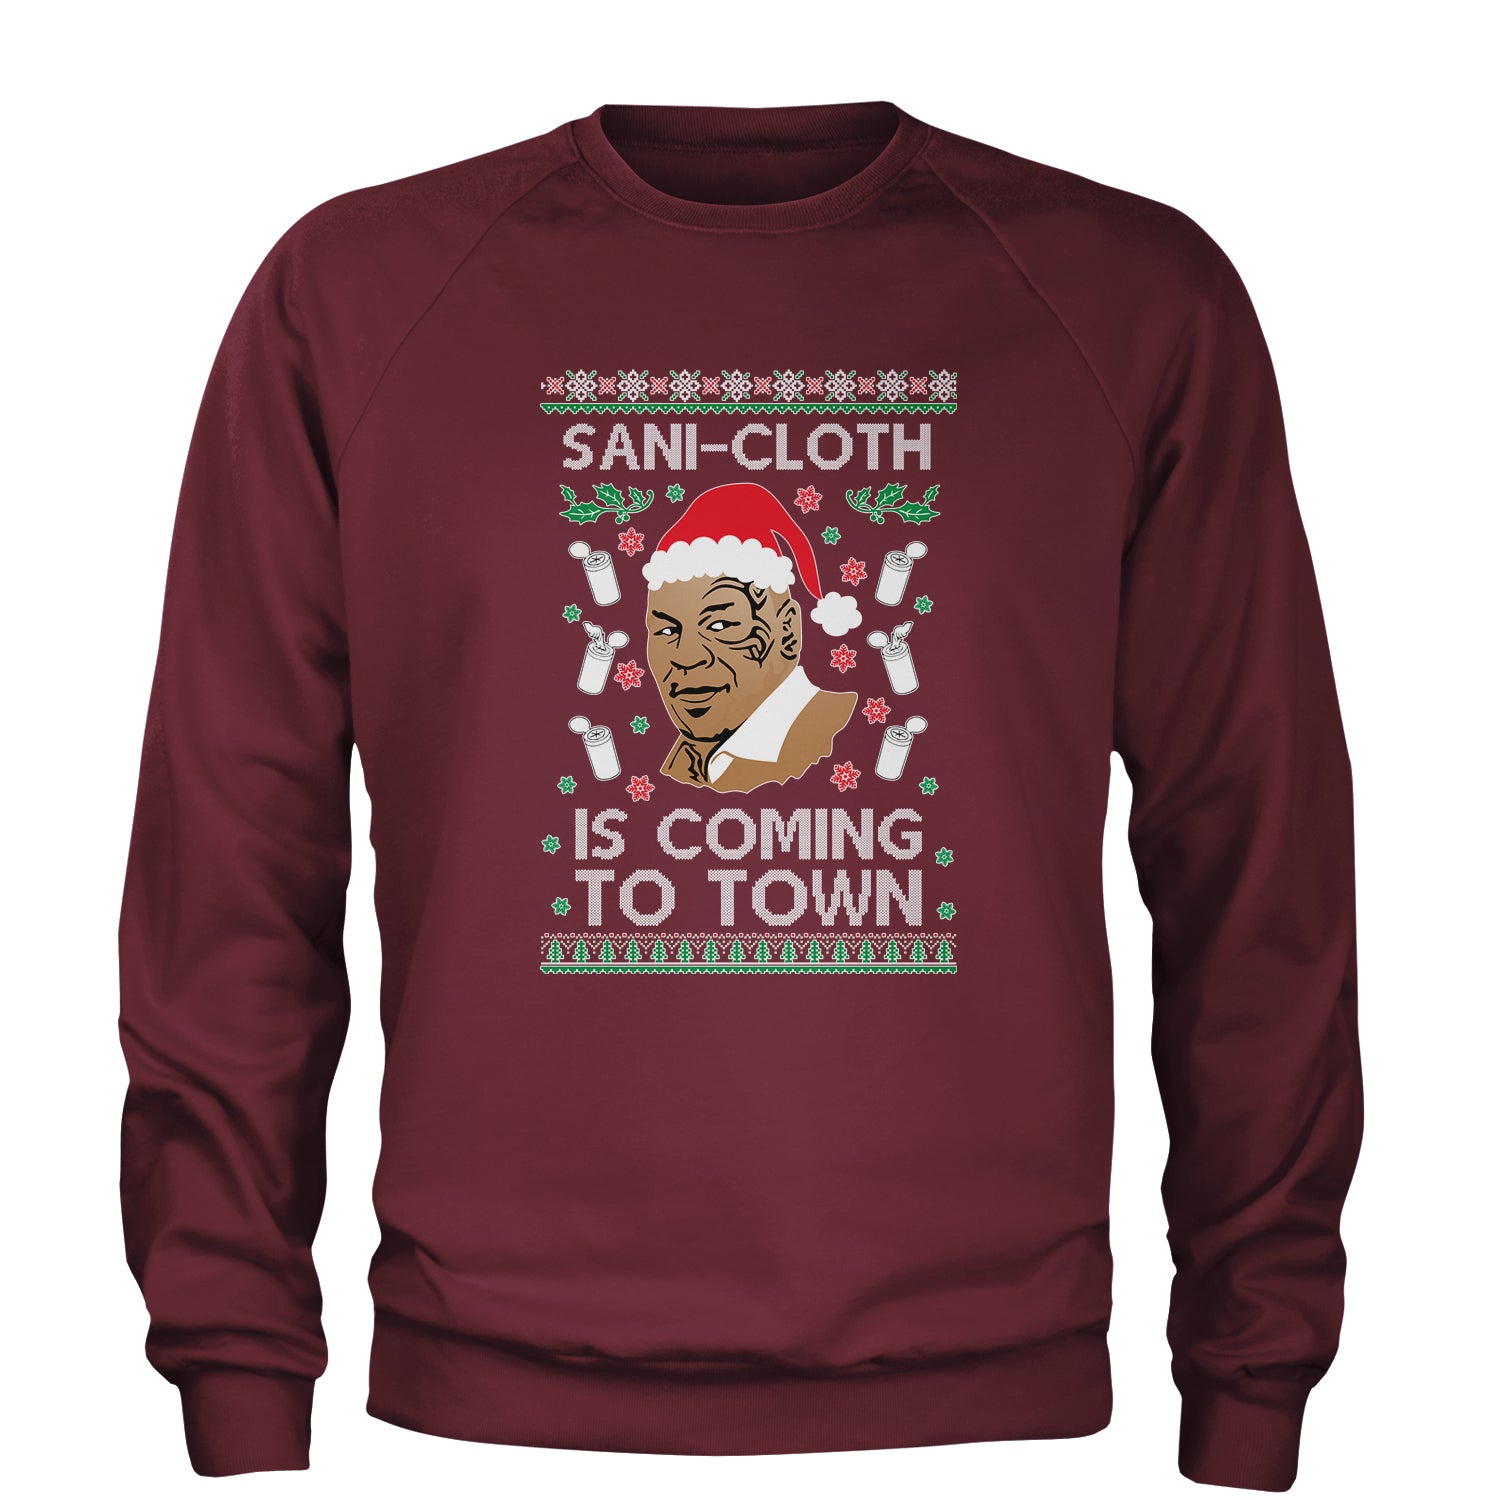 Sani-Cloth Is Coming To Town Ugly Christmas Adult Crewneck Sweatshirt 2021, mike, miketyson, tyson by Expression Tees